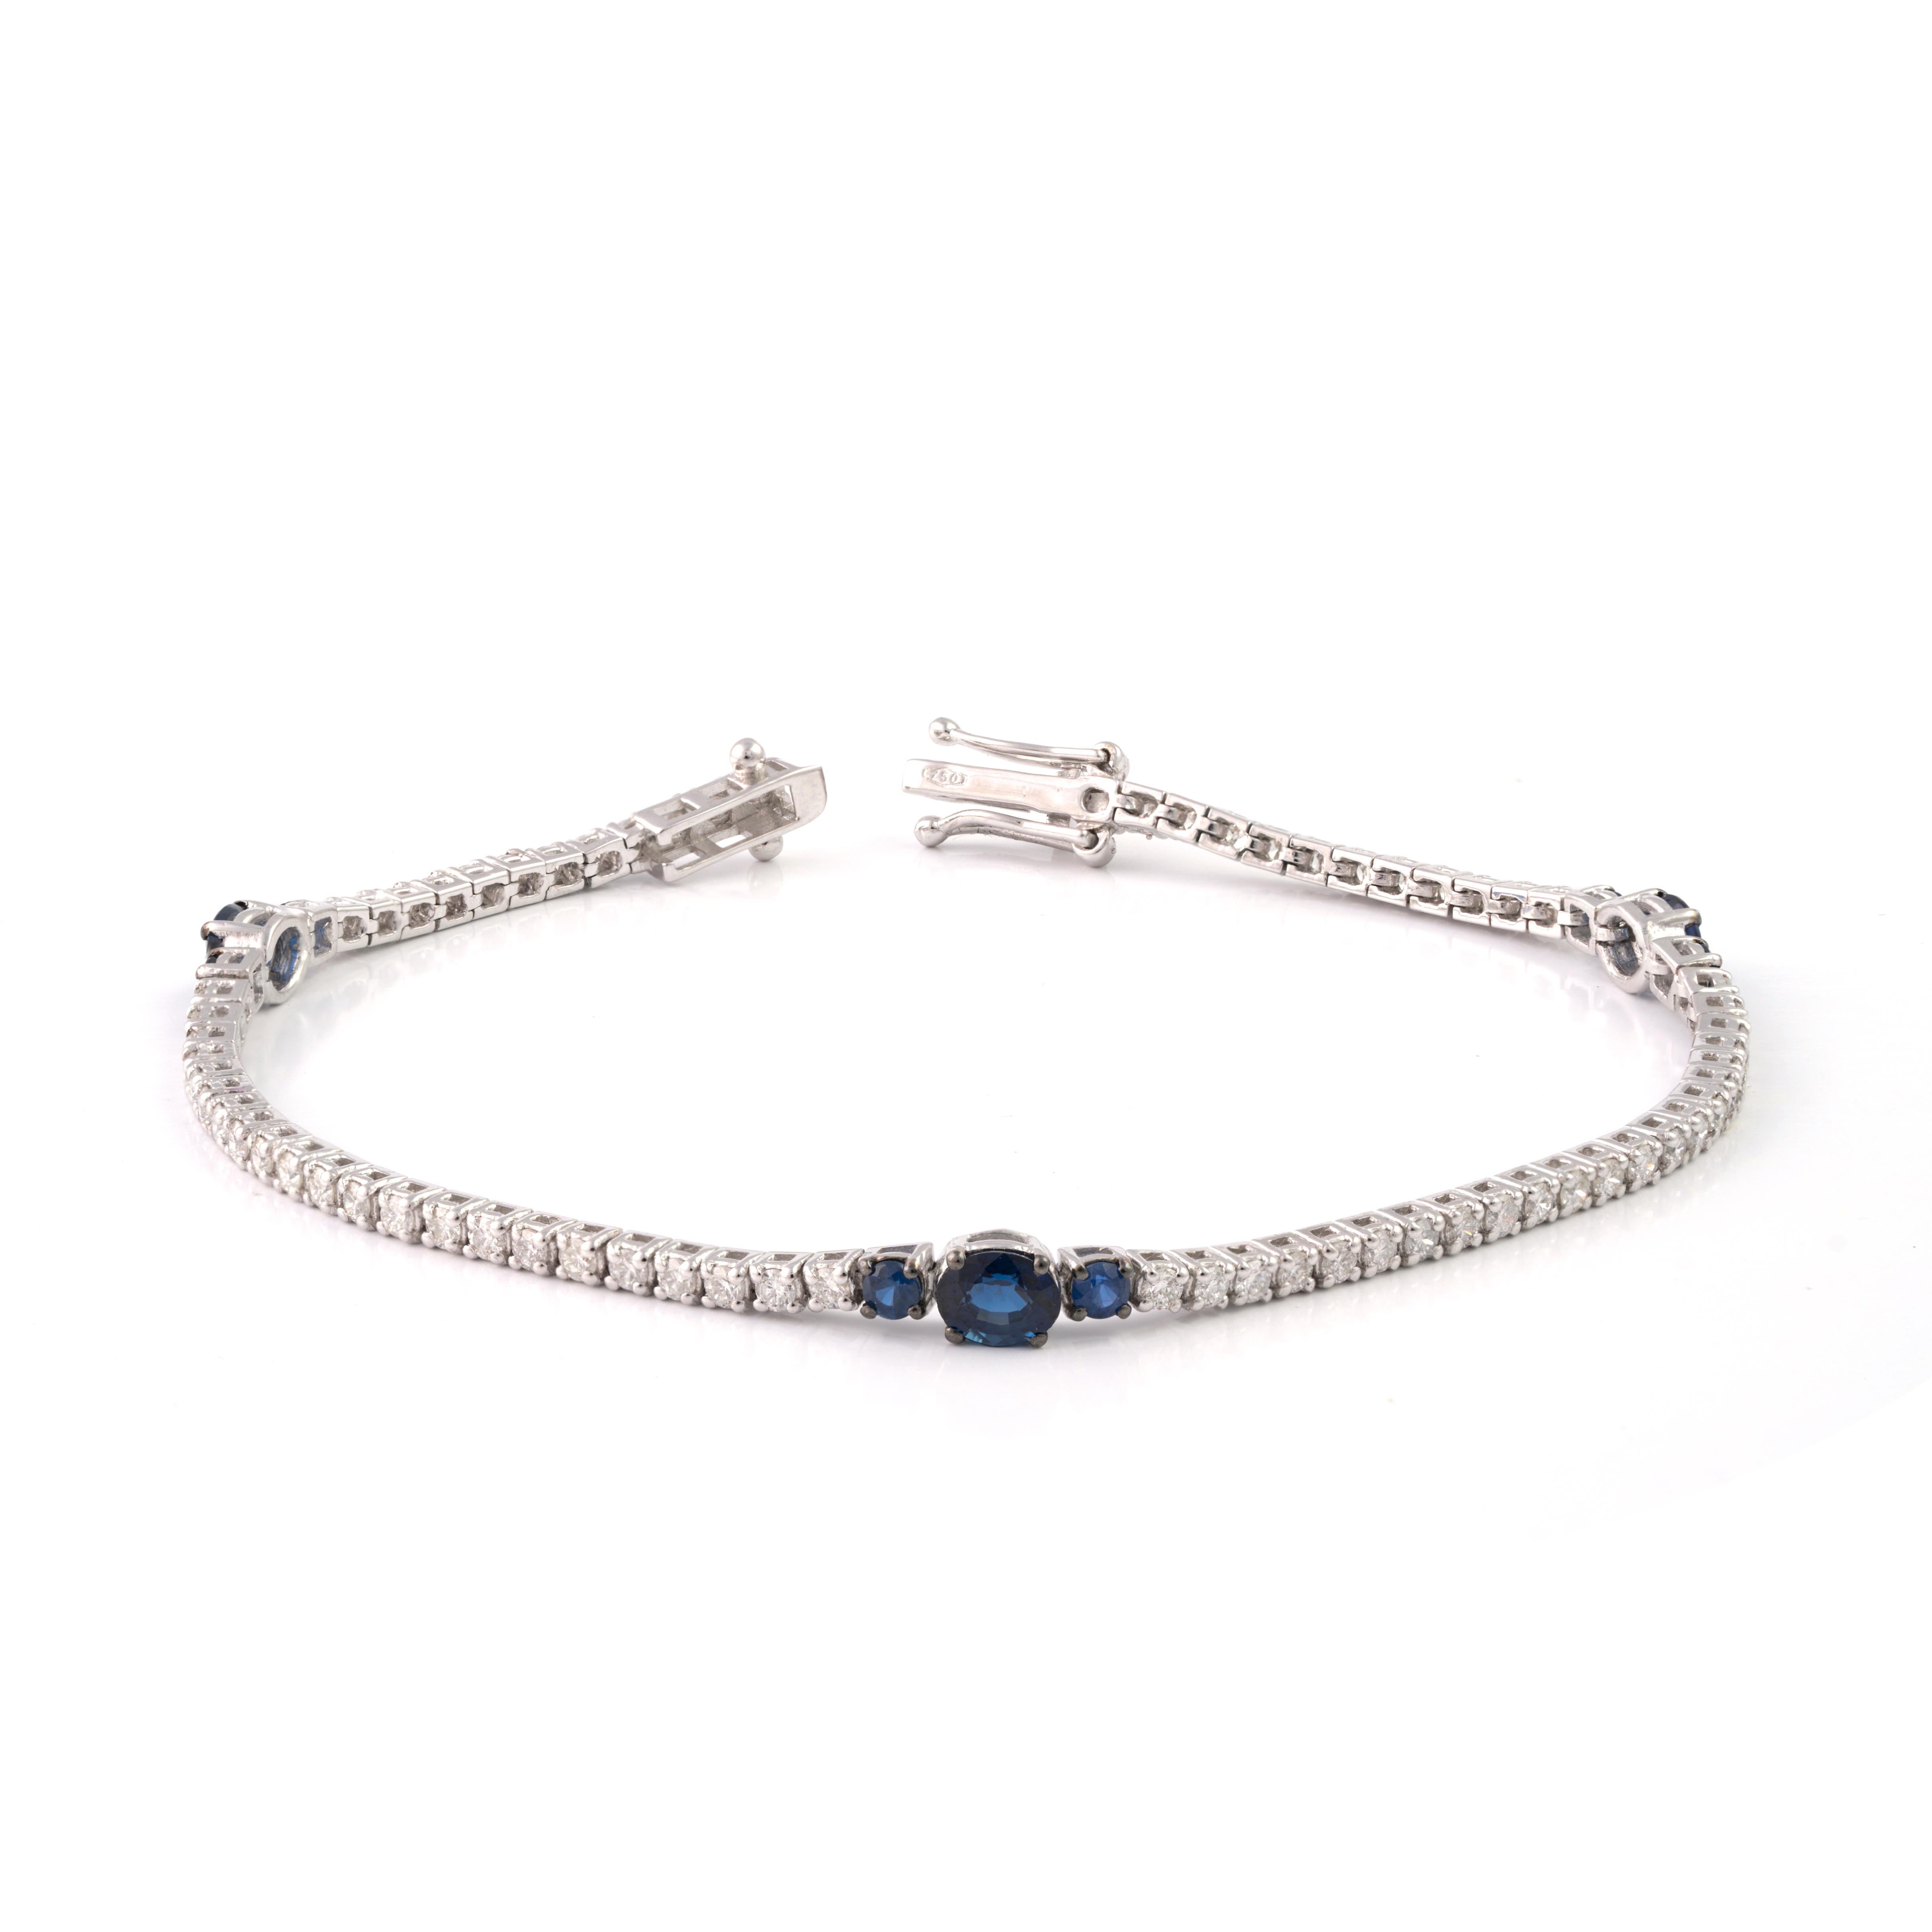 This is an amazing natural blue sapphire tennis bracelet with 1.67 carats of blue sapphire and white diamond are 1.47 carats. Gold Weight is 6.98 gms (18k)
It’s very hard to capture the true color and luster of the stone, I have tried to add